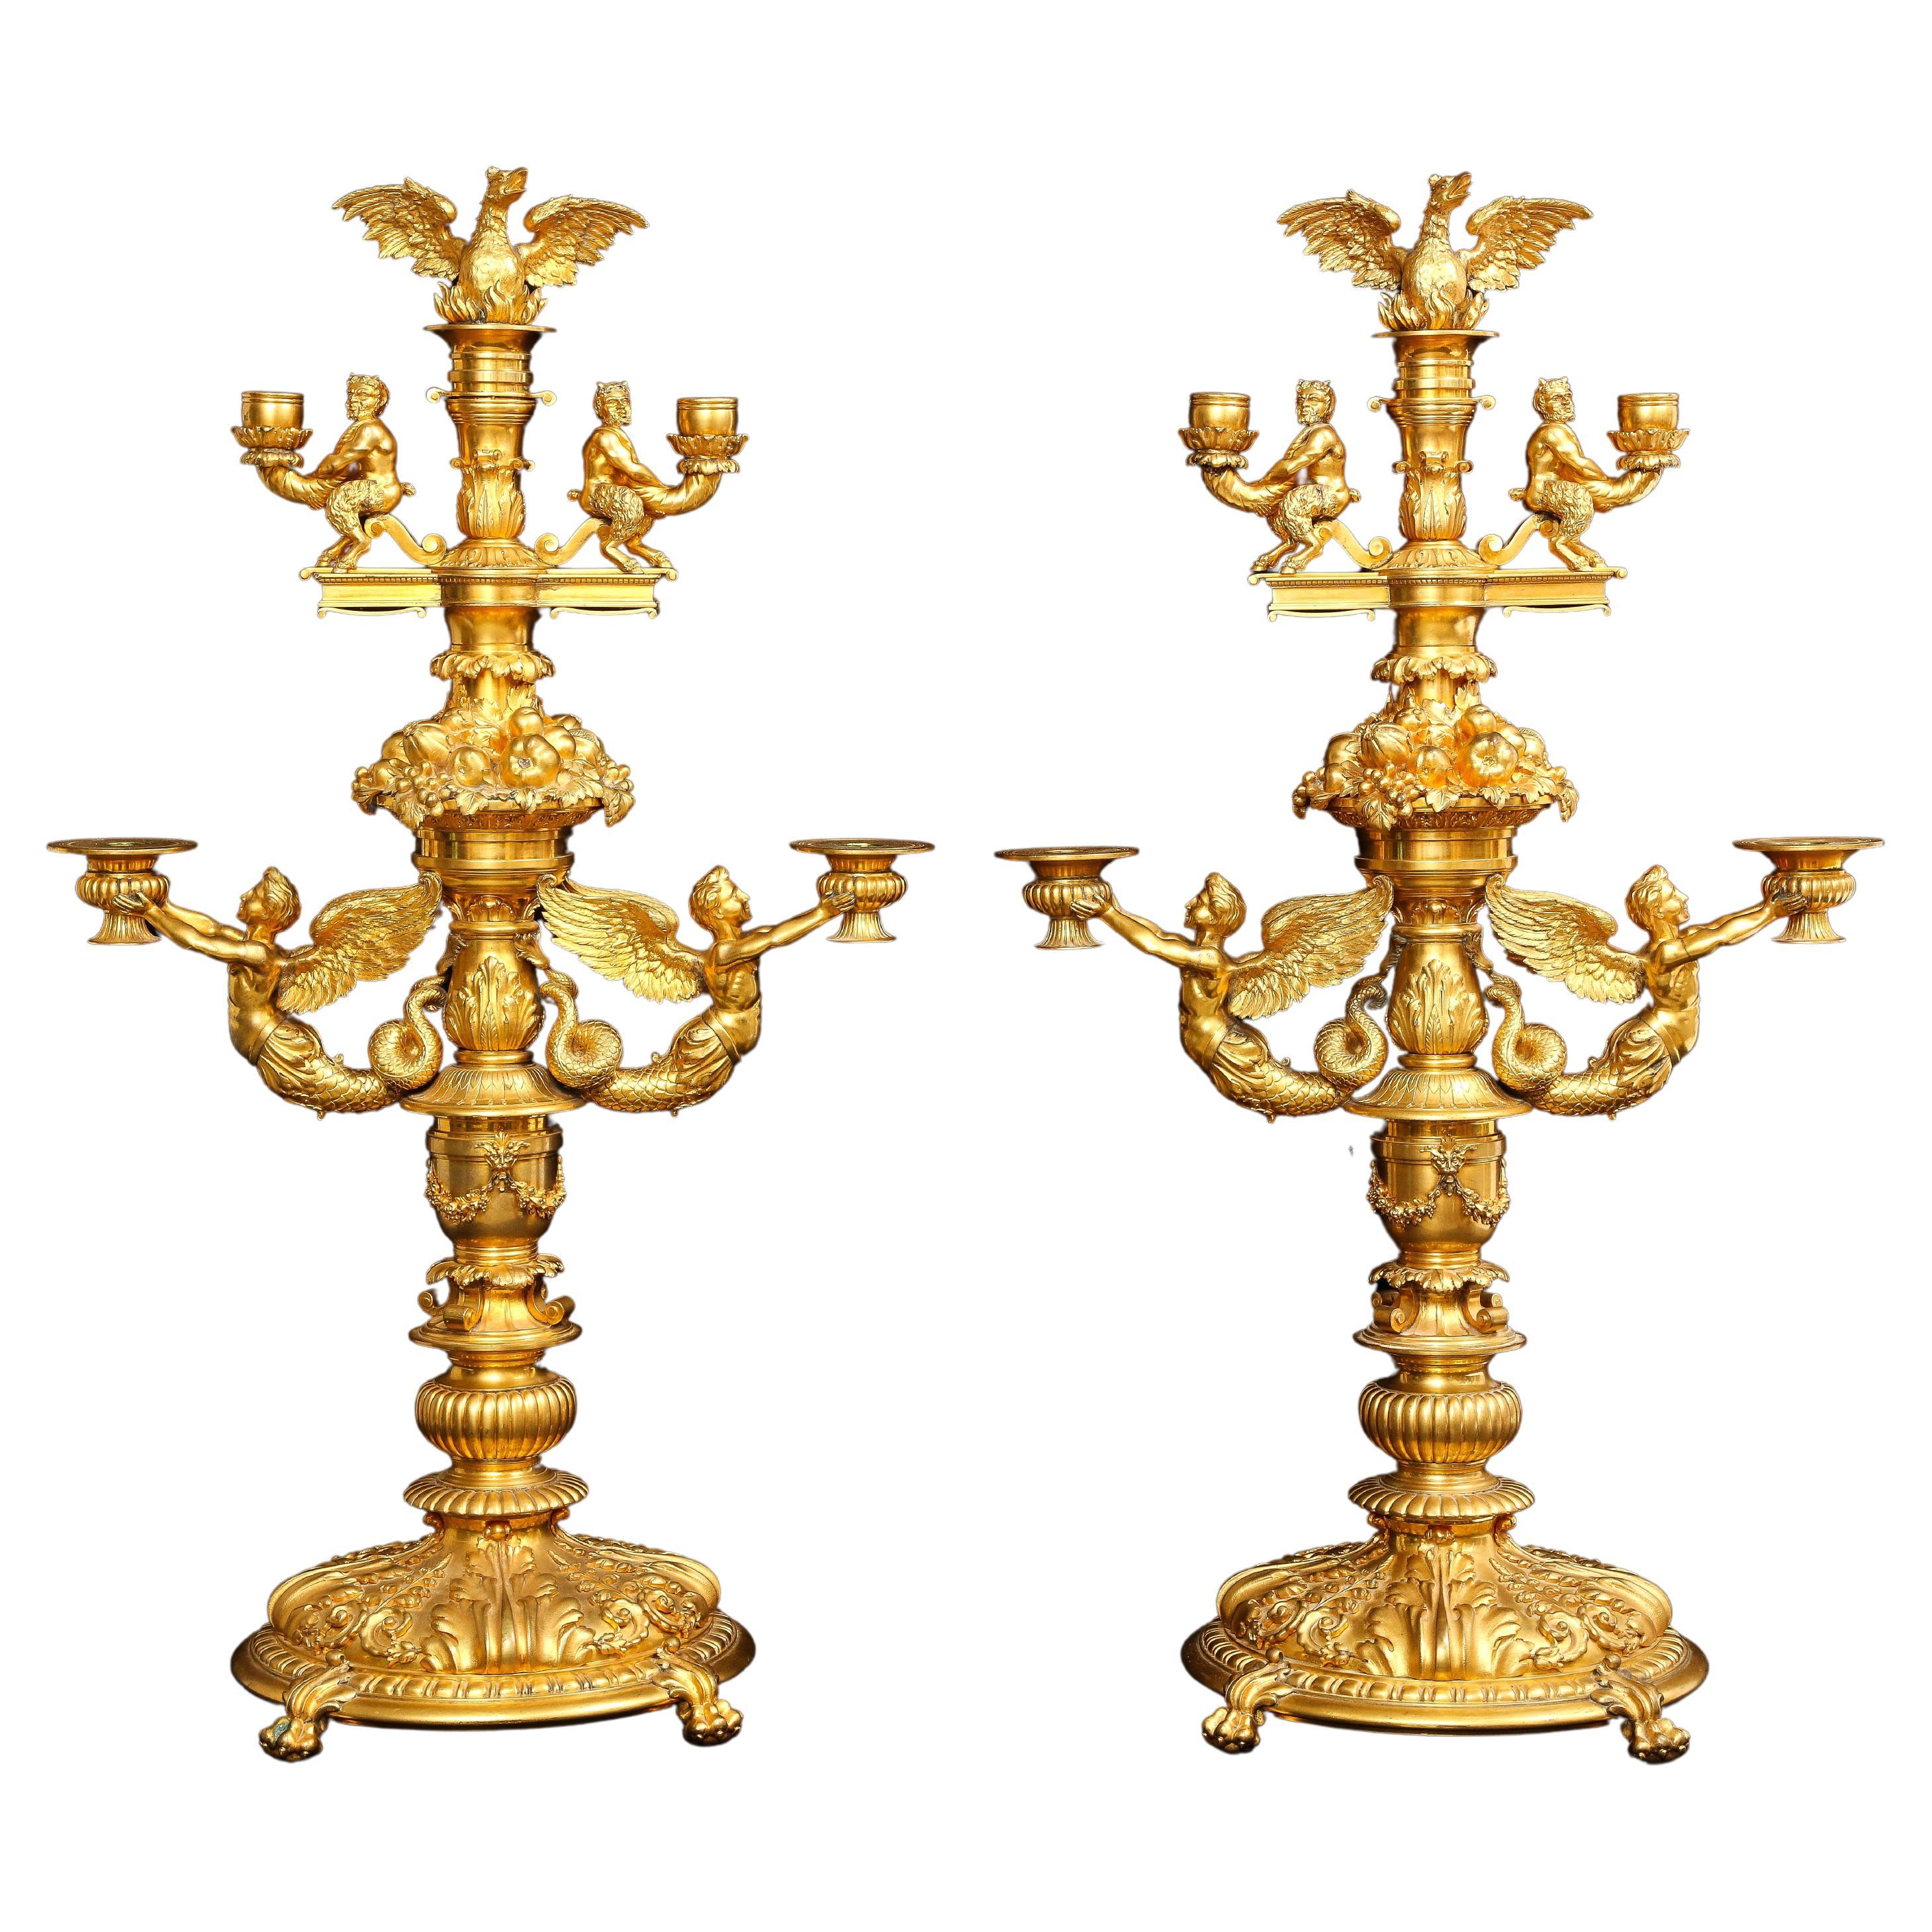 Marvelous Pair of 19th C. French Ormolu Four Arm Candelabras, Signed P. Canaux For Sale